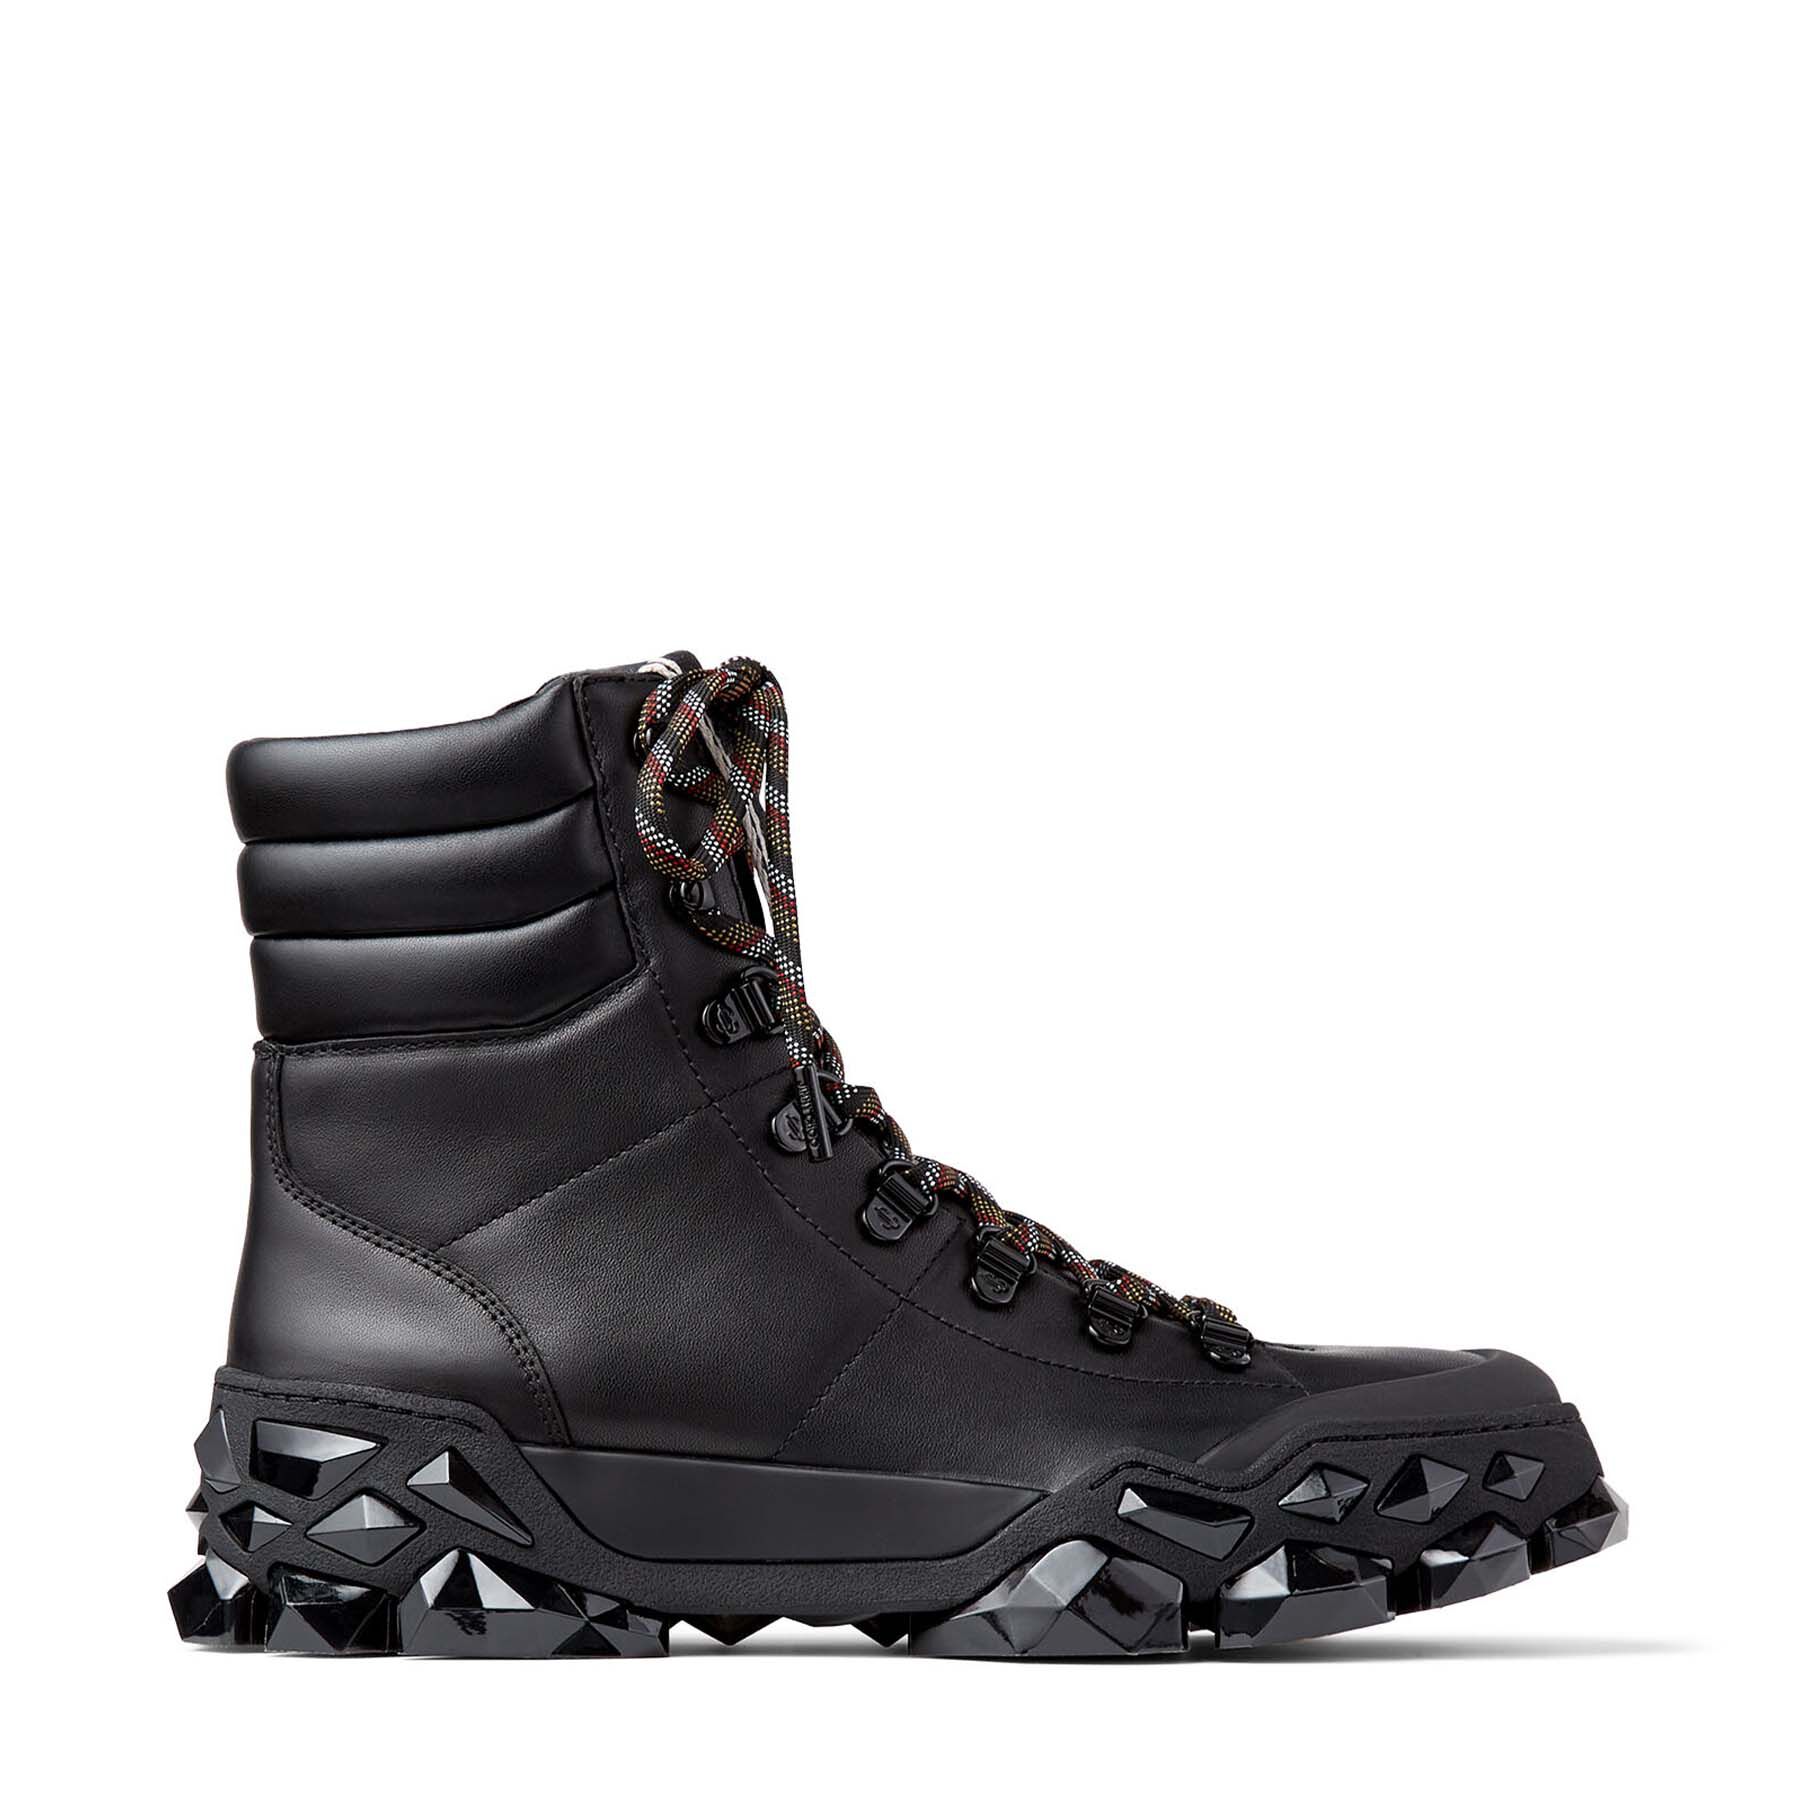 Black Smooth Leather Hiking Boots with Mulitfaceted Sole | DIAMOND 